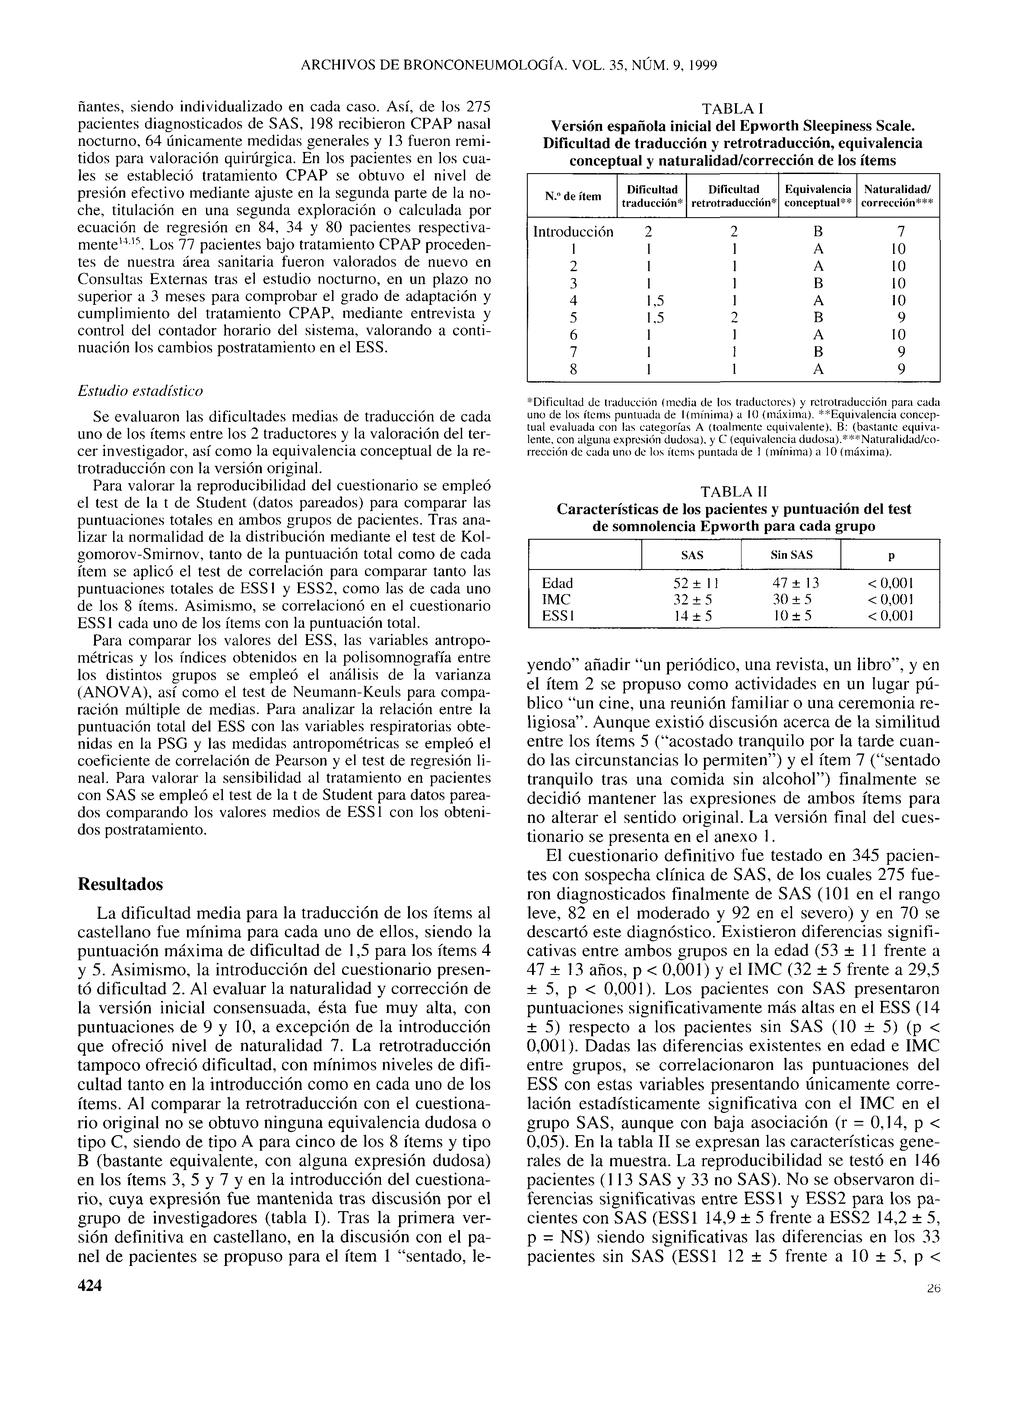 Document downloaded from http://www.elsevier.es, day 27/09/207. This copy is for personal use. ny transmission of this document by any media or format is strictly prohibited.